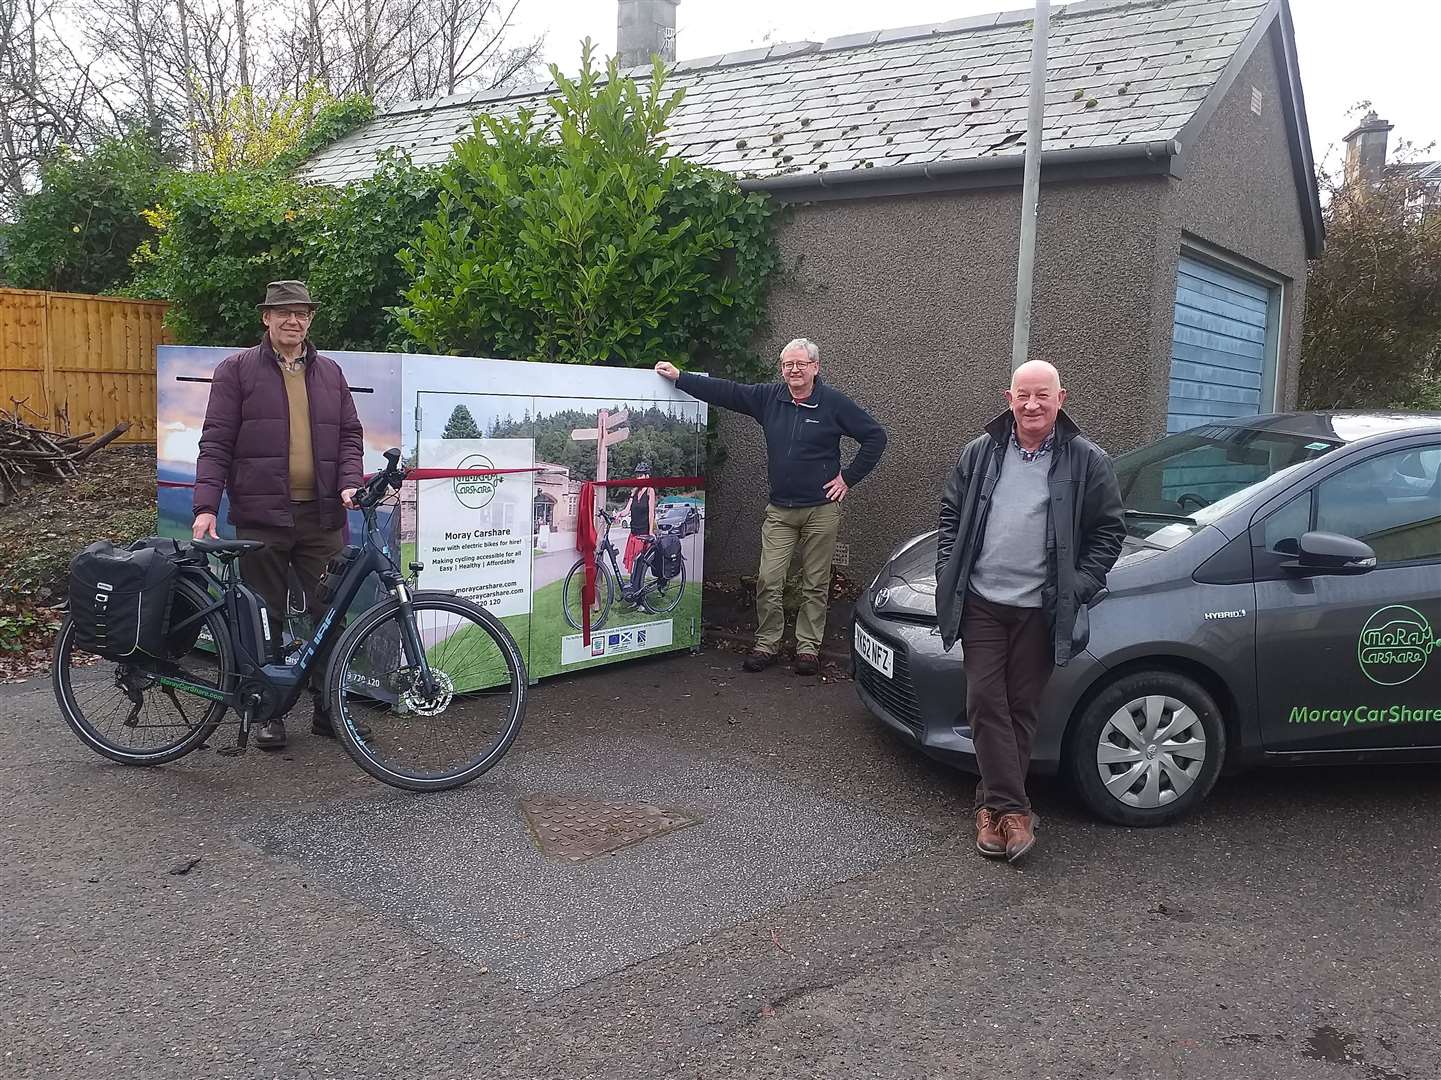 (From left) Gordon McAlpine, of Moray Carshare, Bill Malcolm, of Aberlour Community Association, and Councillor Derek Ross (Speyside Glenlivet) at the launch of Moray Carshare’s new car and e-bike services in Aberlour.